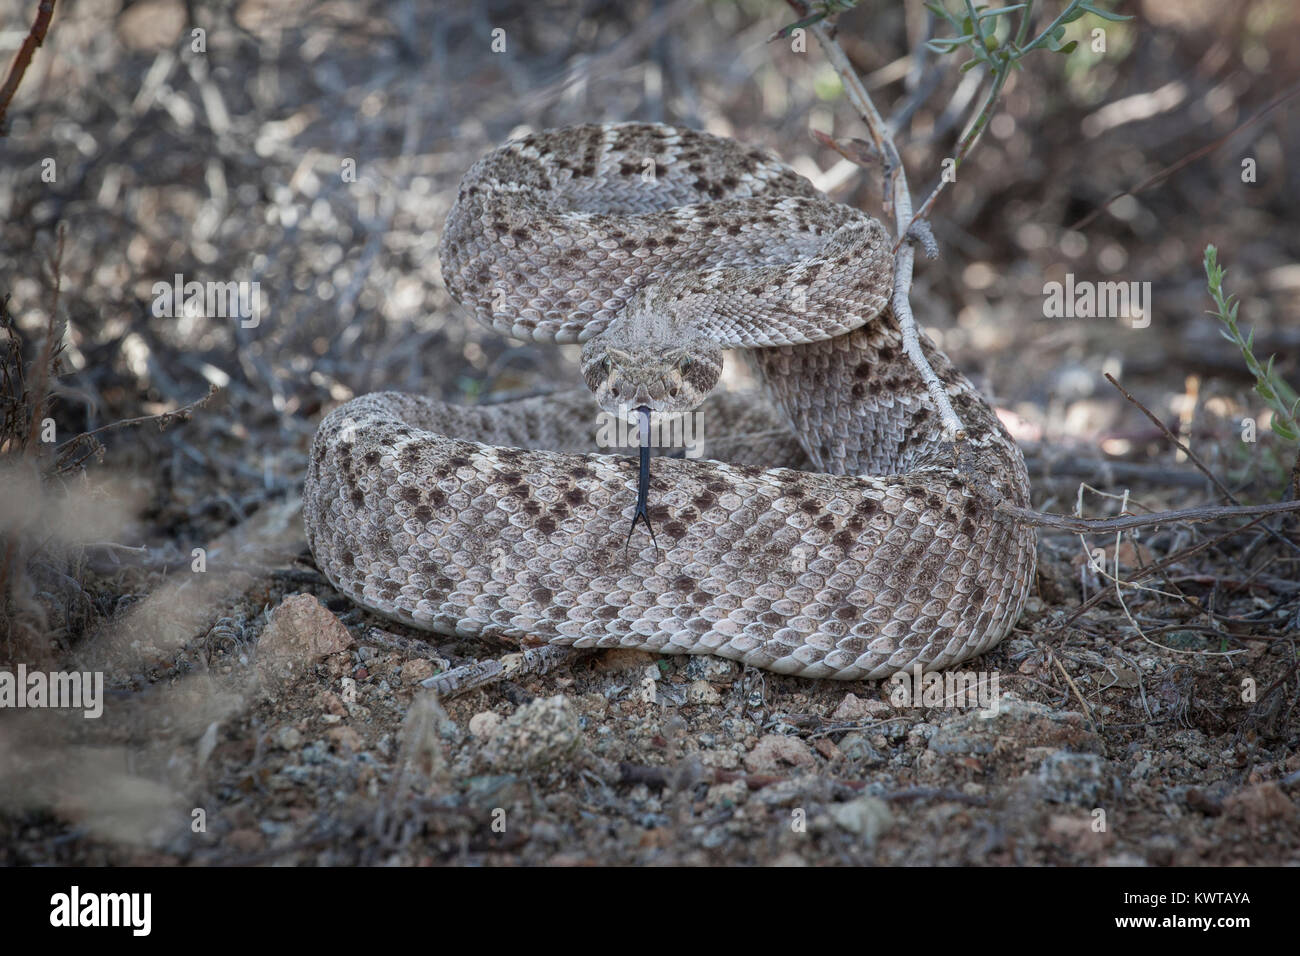 Coiled western diamondback rattlesnake (Crotalus atrox), ready to strike, extending its forked tongue. Stock Photo